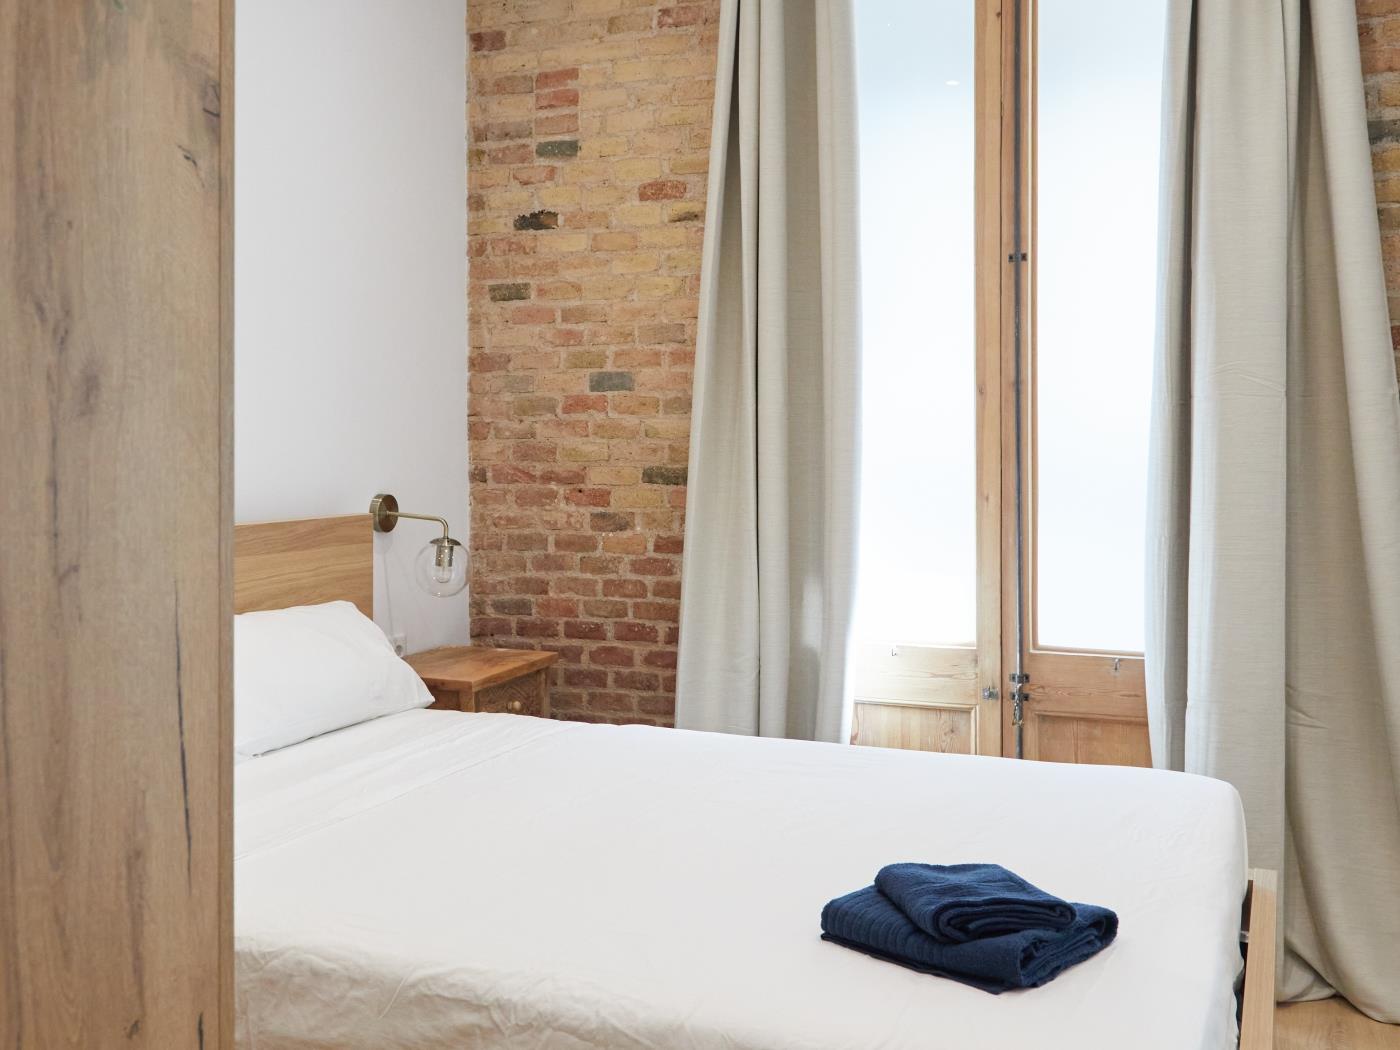 Brand new mid-term one-bedroom apartment for rent in Gracia - My Space Barcelona Apartments